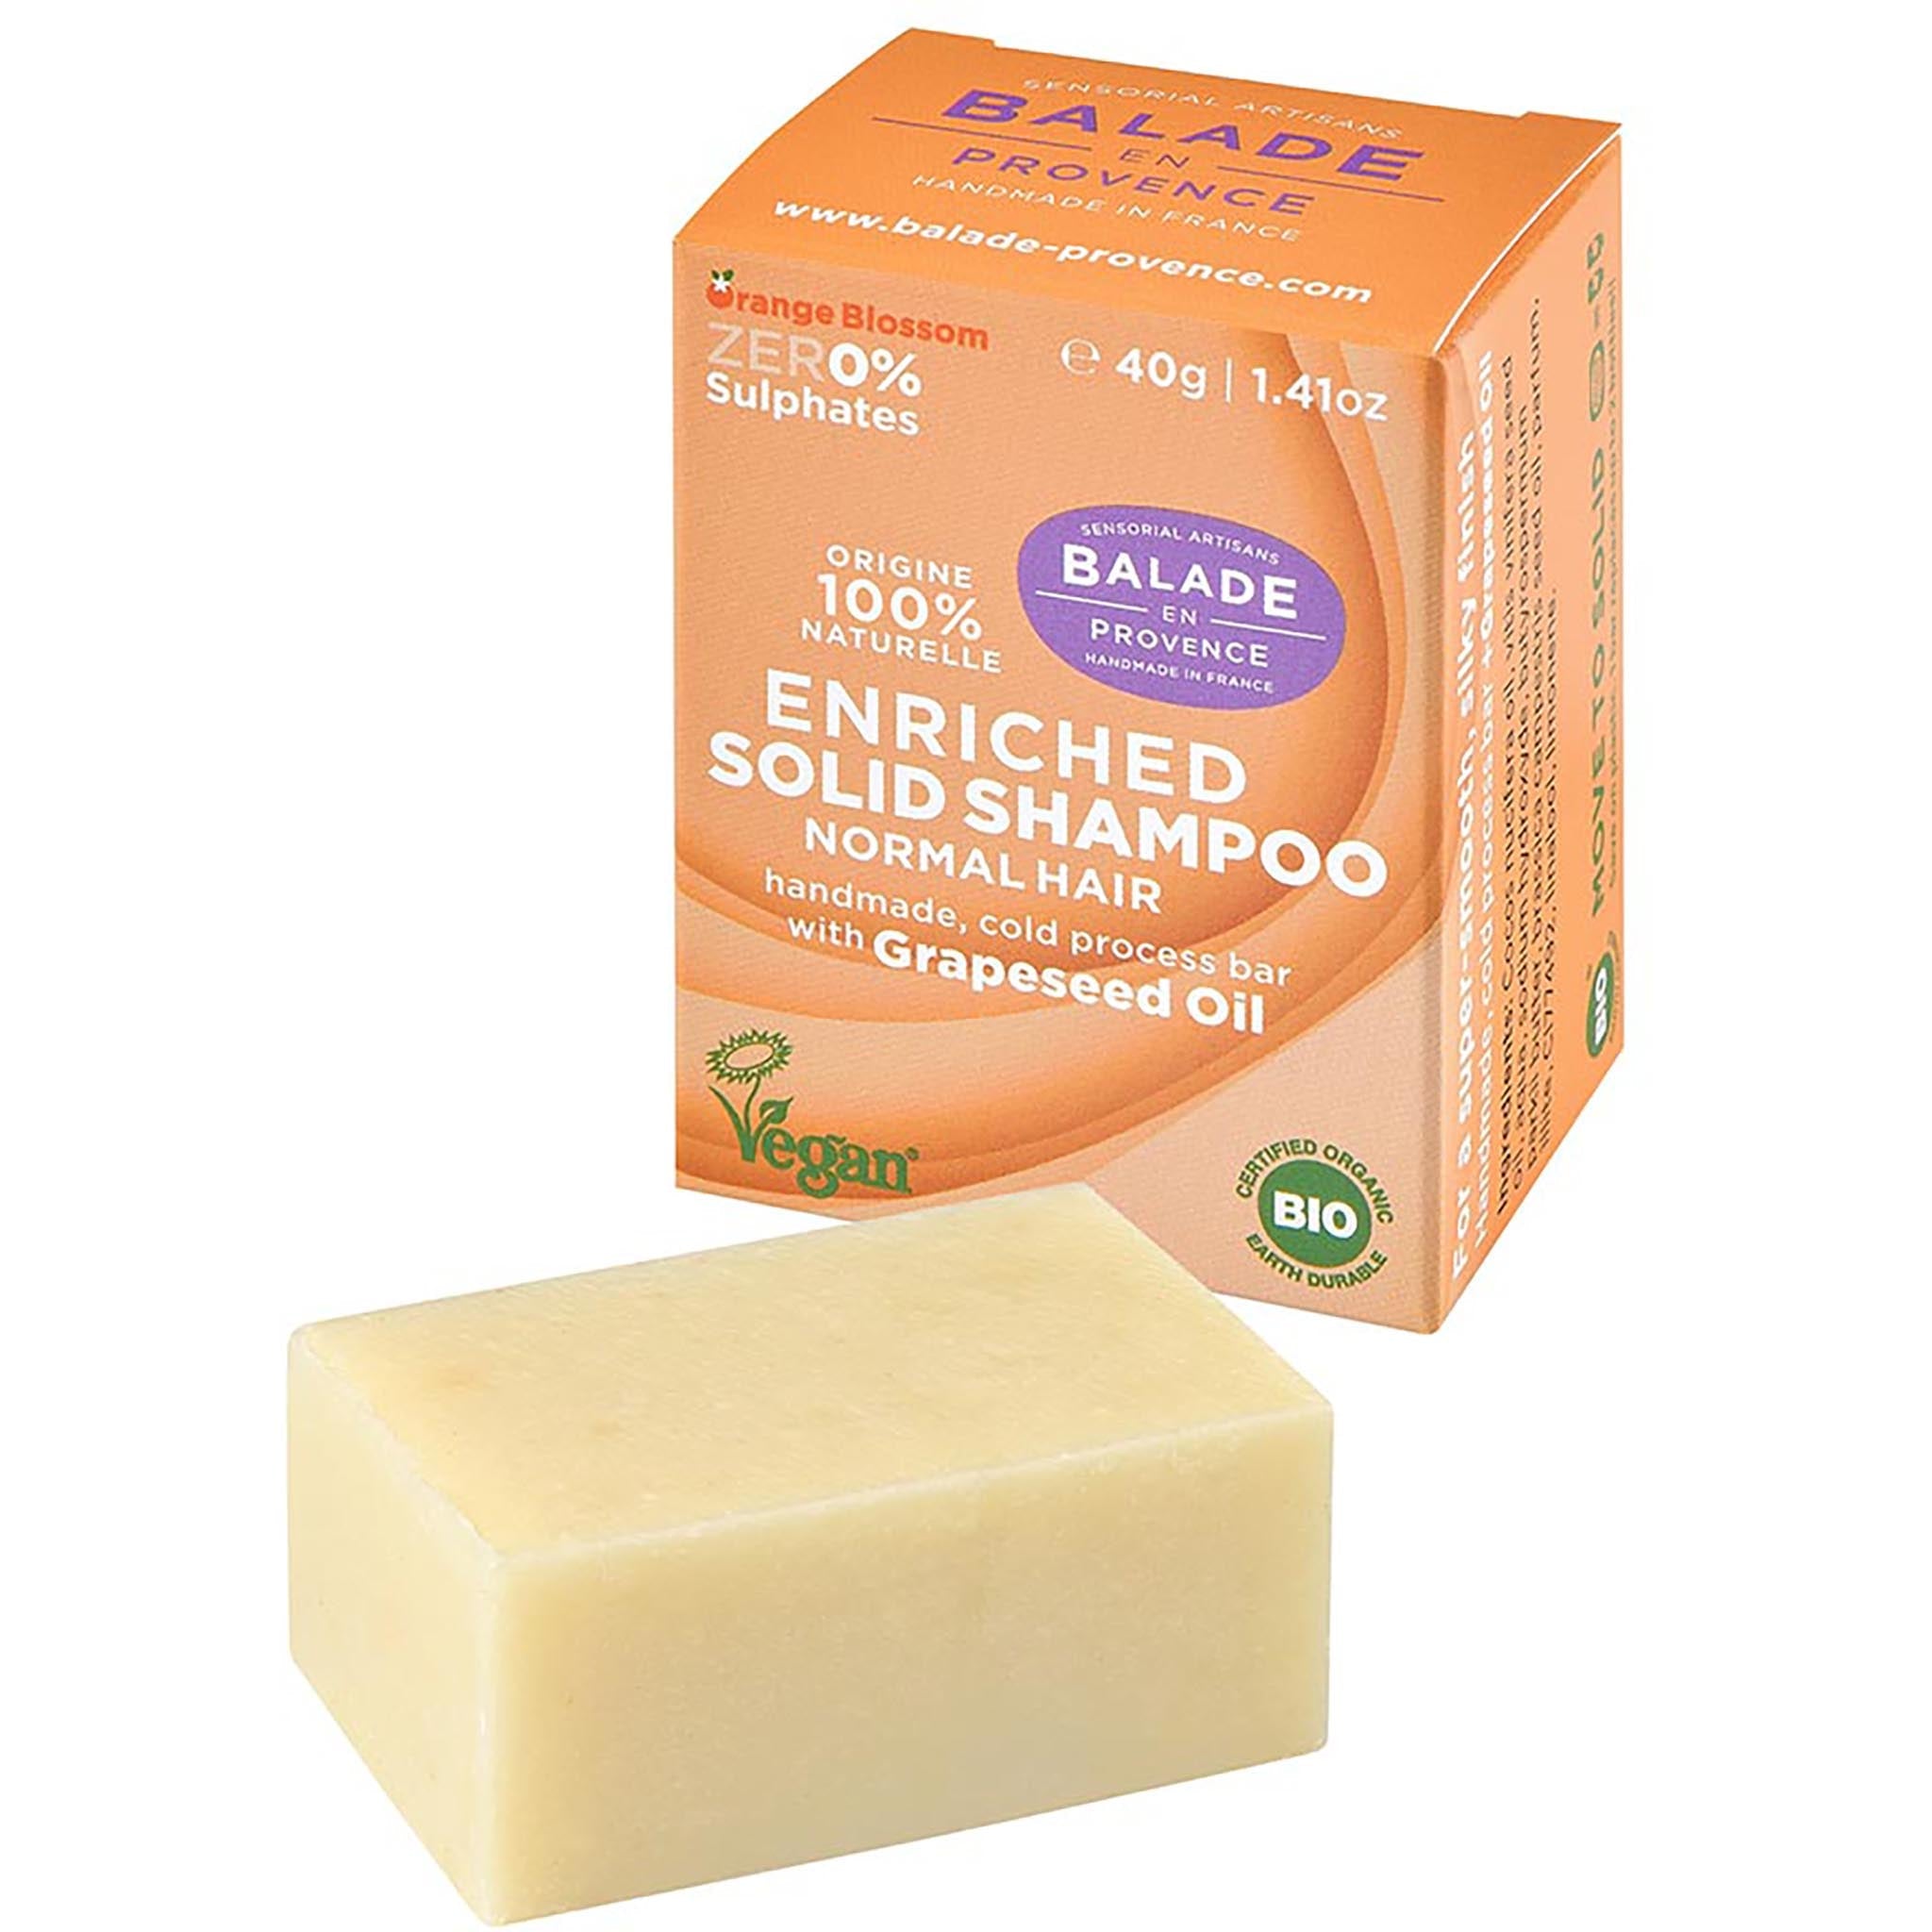 Solid Shampoo Bar | Enriched - mypure.co.uk